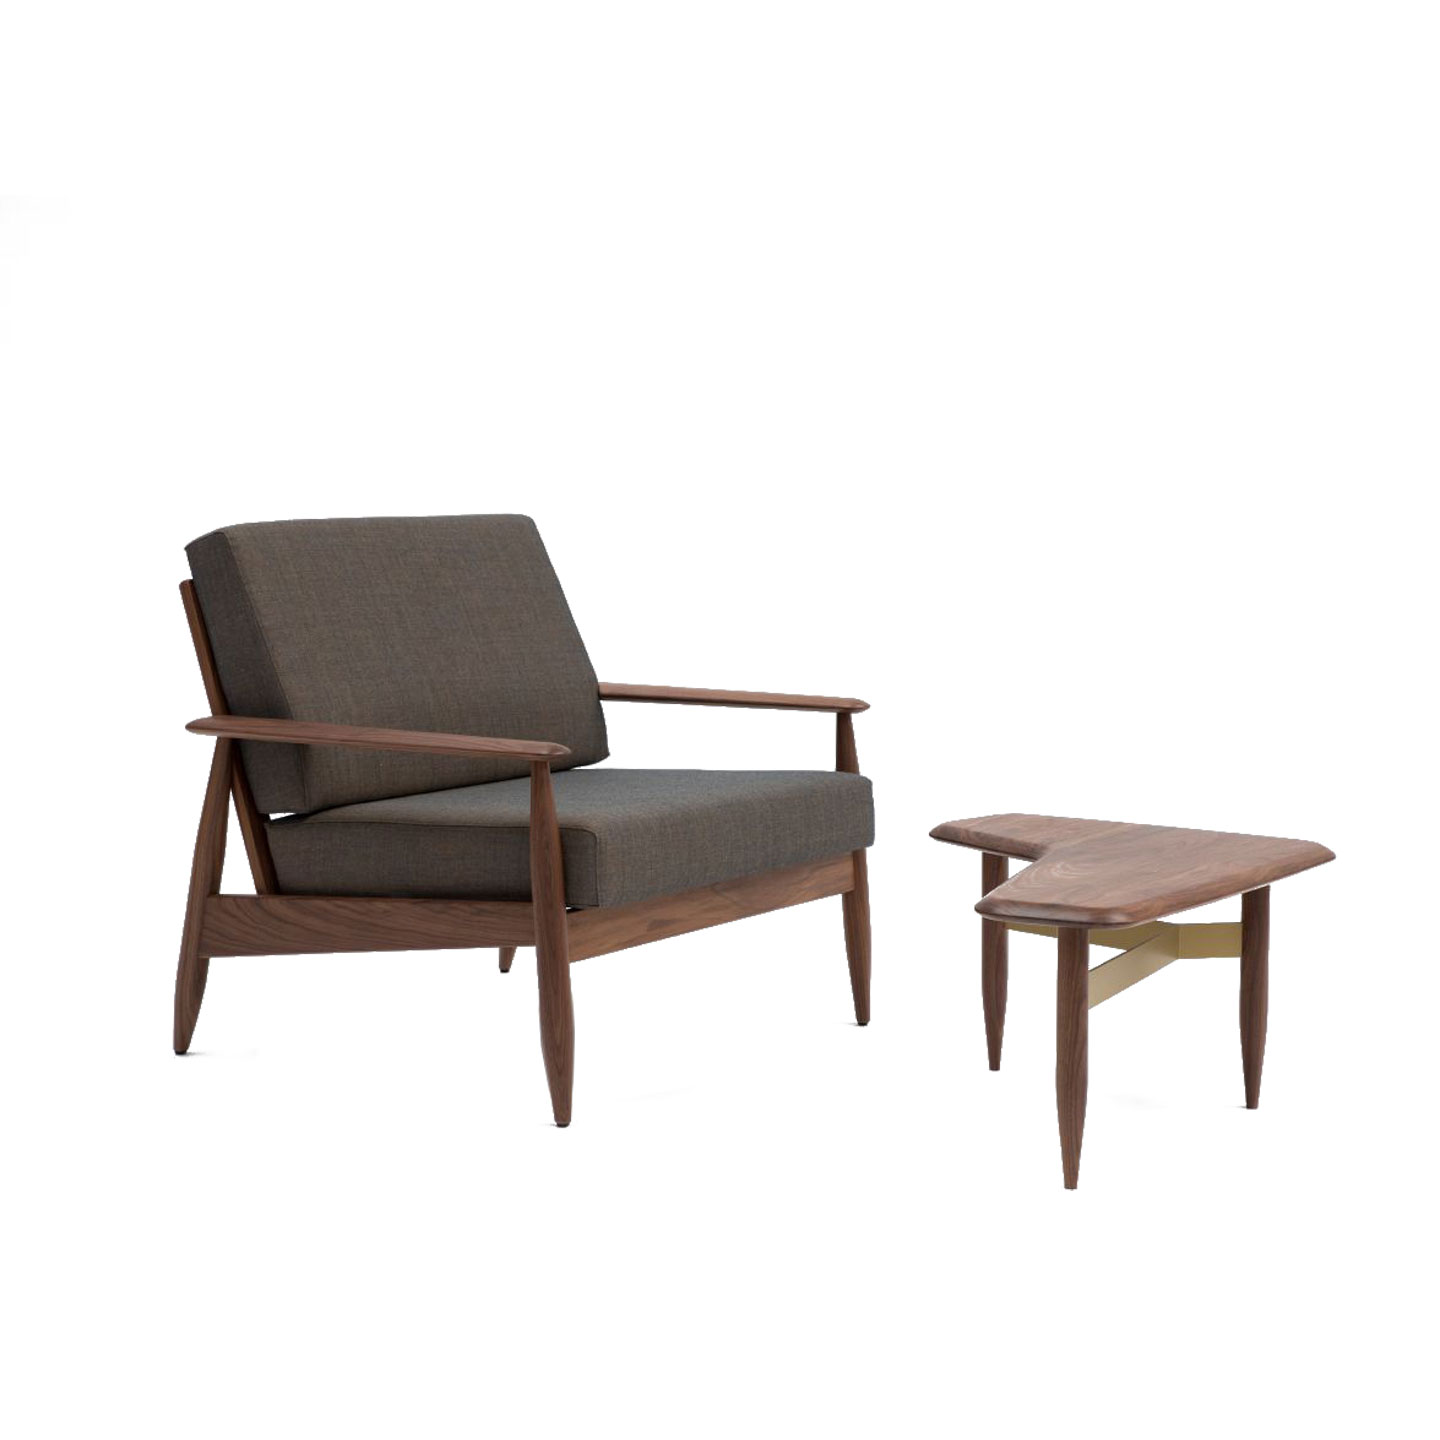 Haworth Buzzi Nordic ST100 lounge chair with laptop table in olive green and wood in a side view